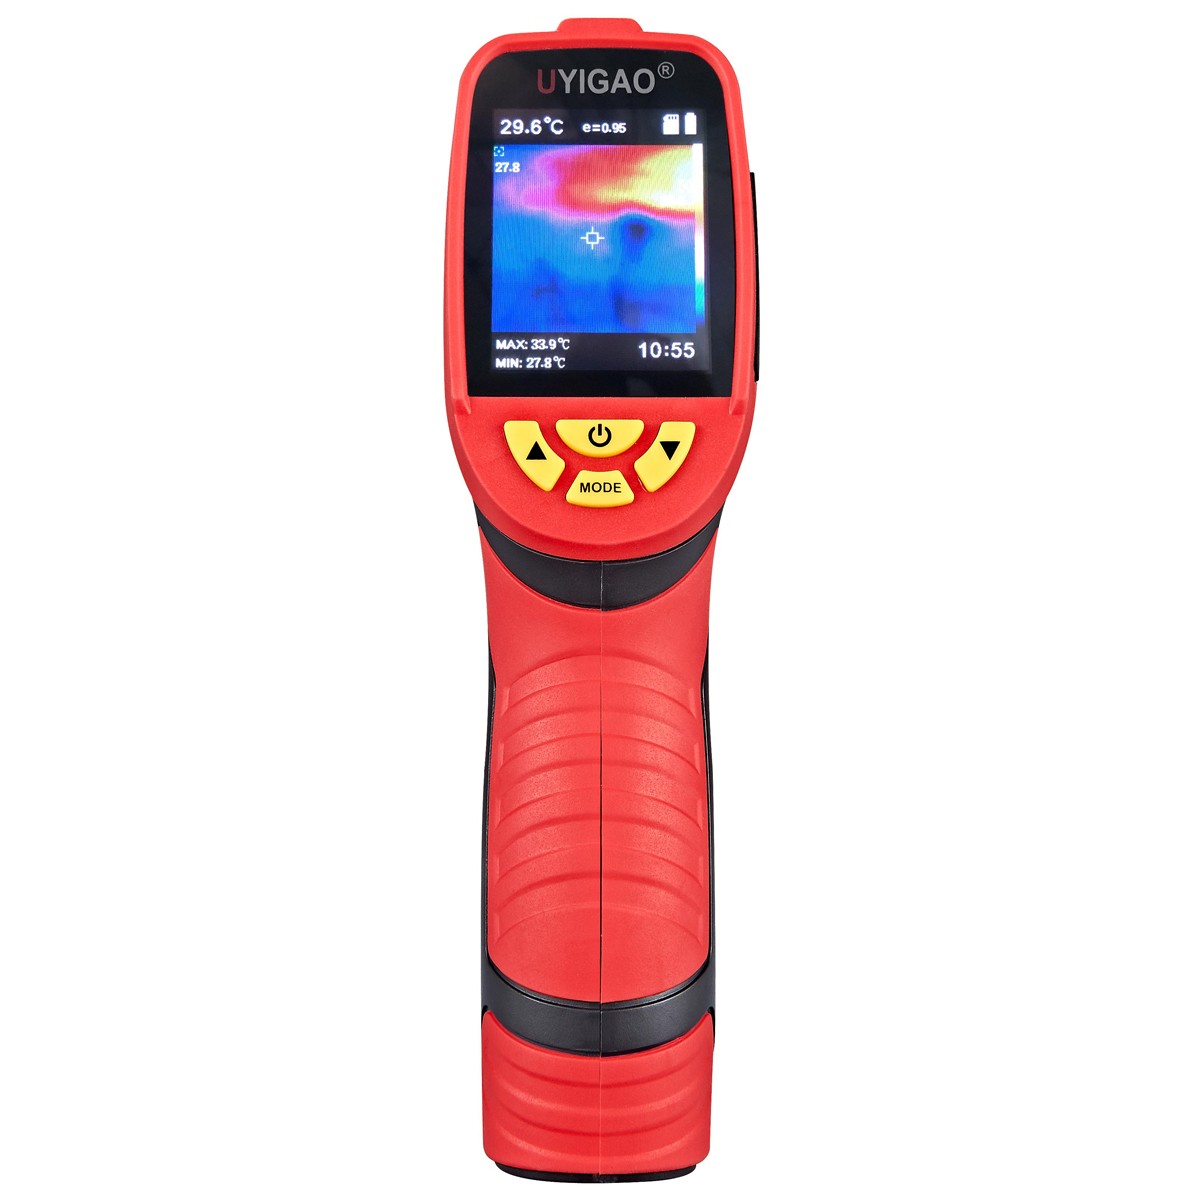 UA99 Infrared Thermal Imager